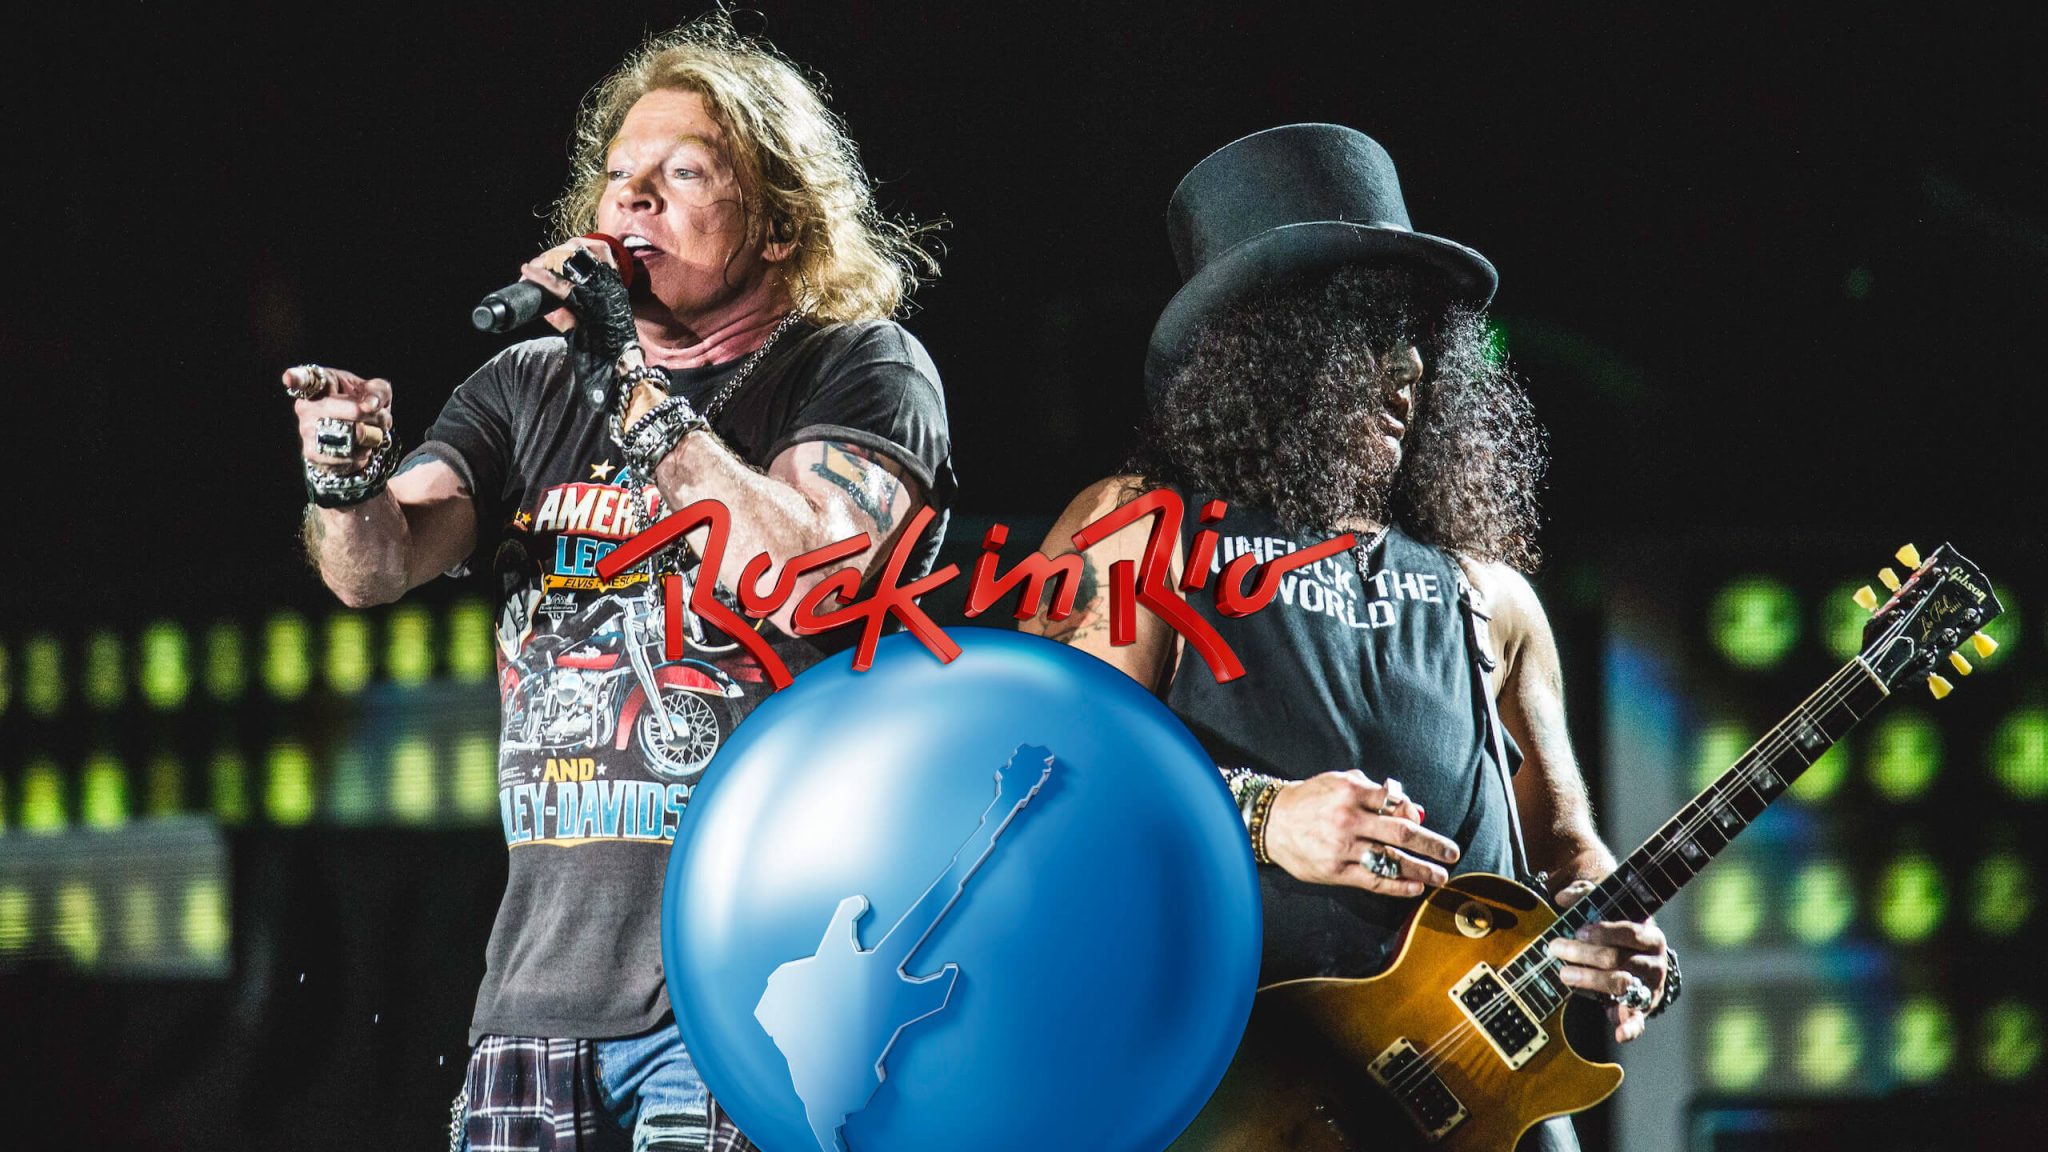 Watch Guns N’ Roses on Rock In Rio live !